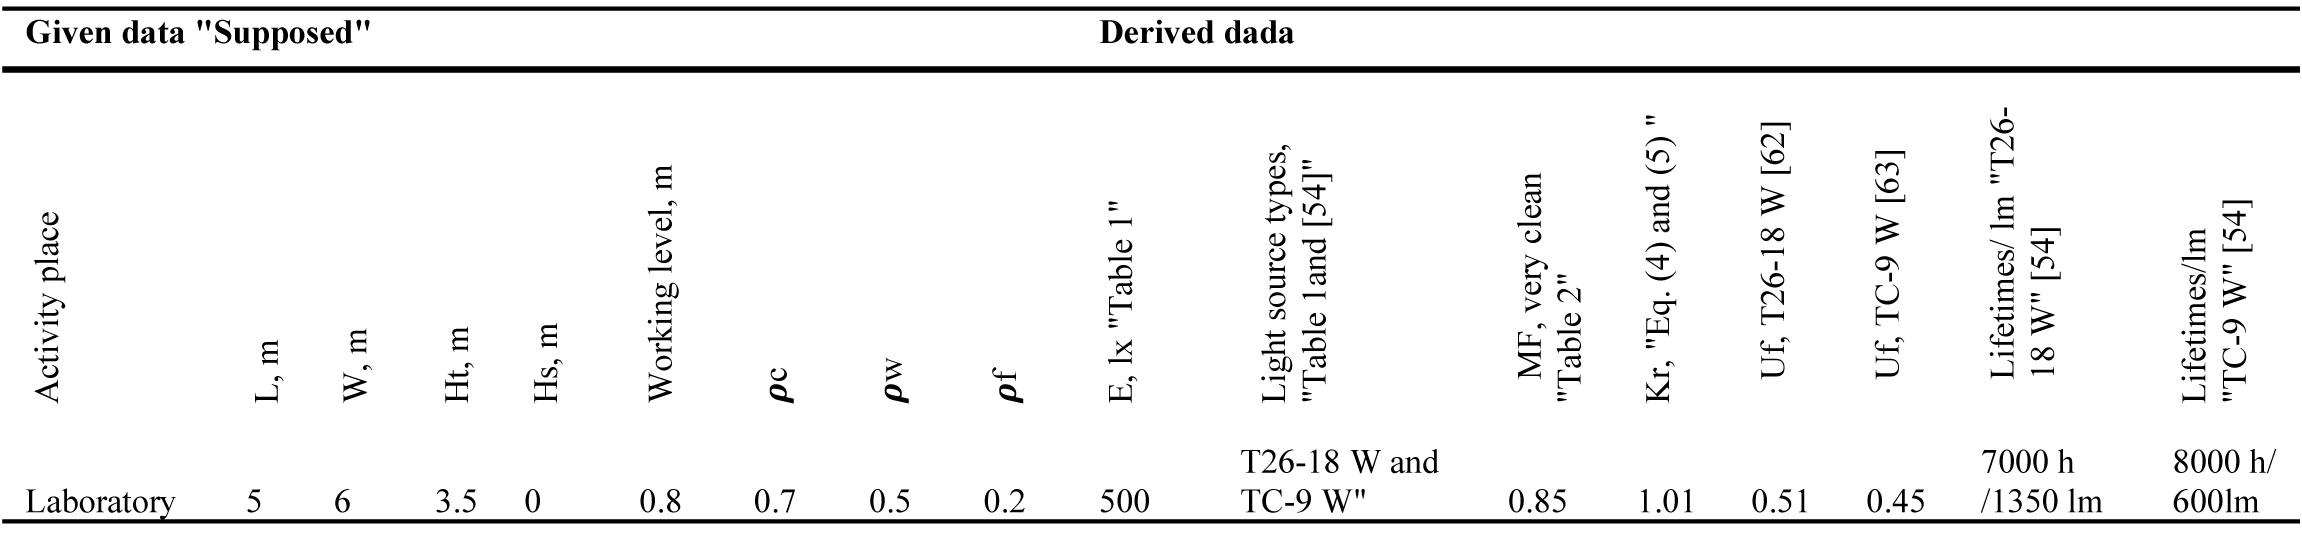 Data of case study 1 "supposed and derived".